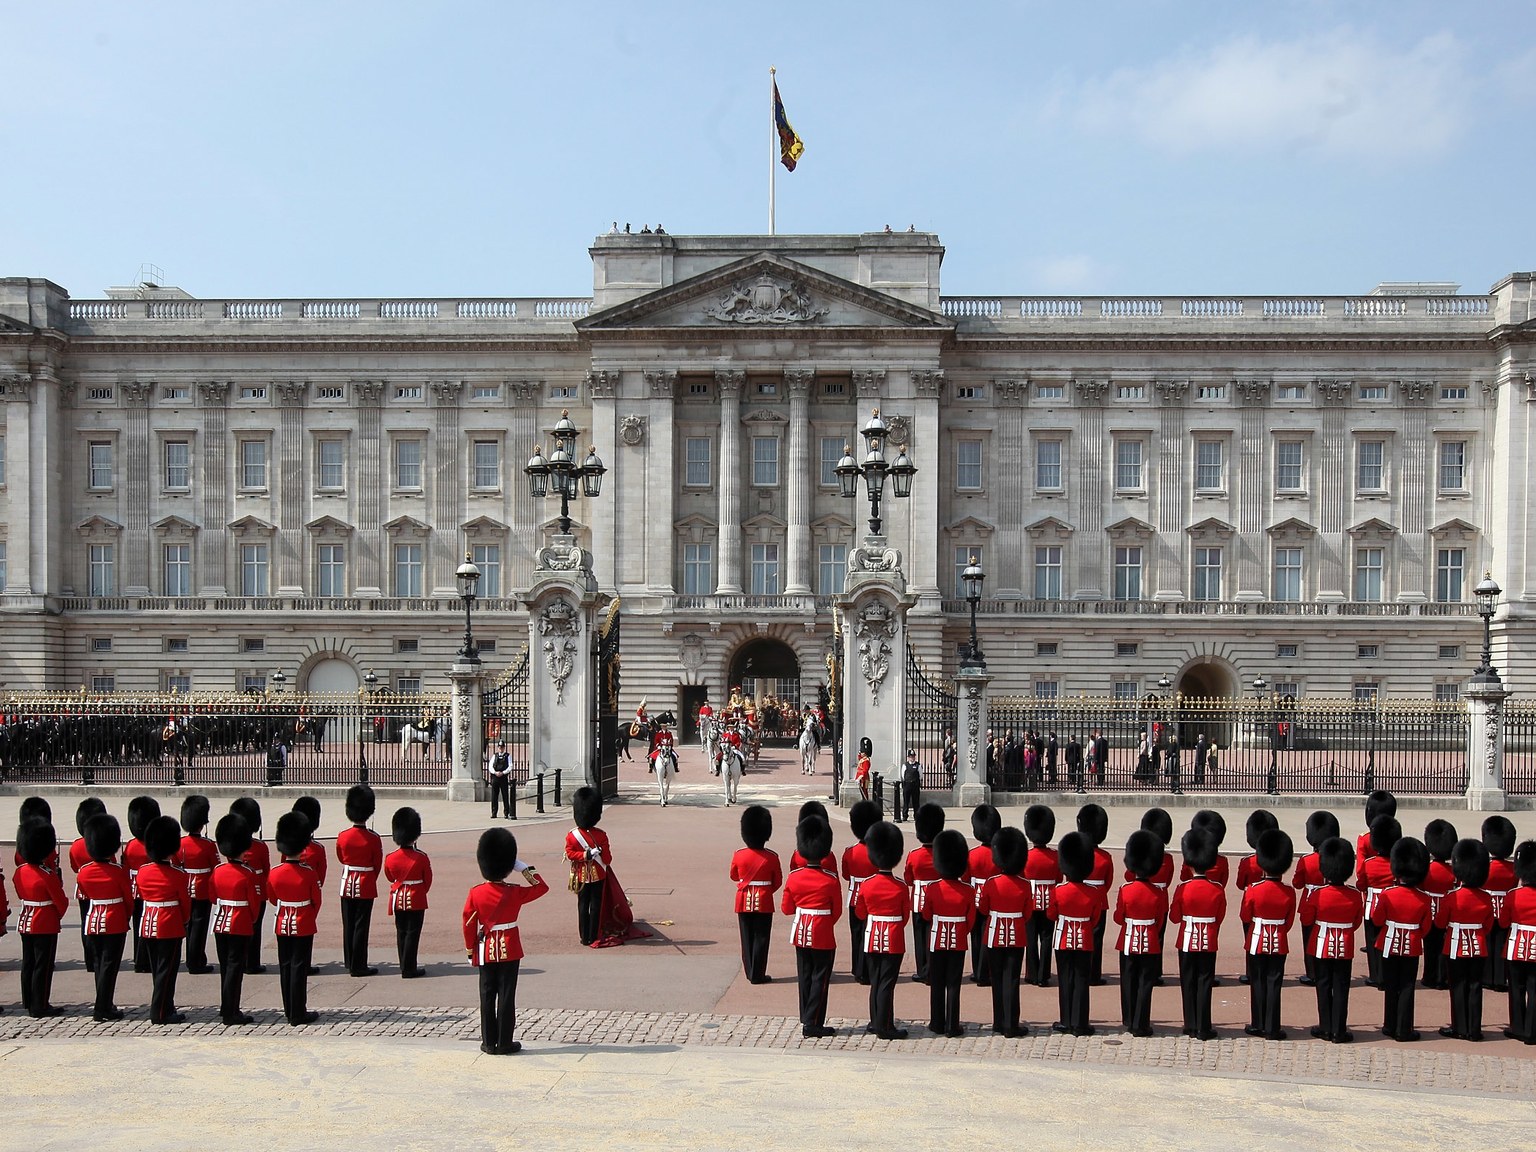 If You Can Score More Than 18 on This Famous Landmarks Quiz, You Probably Know All About the World Buckingham Palace